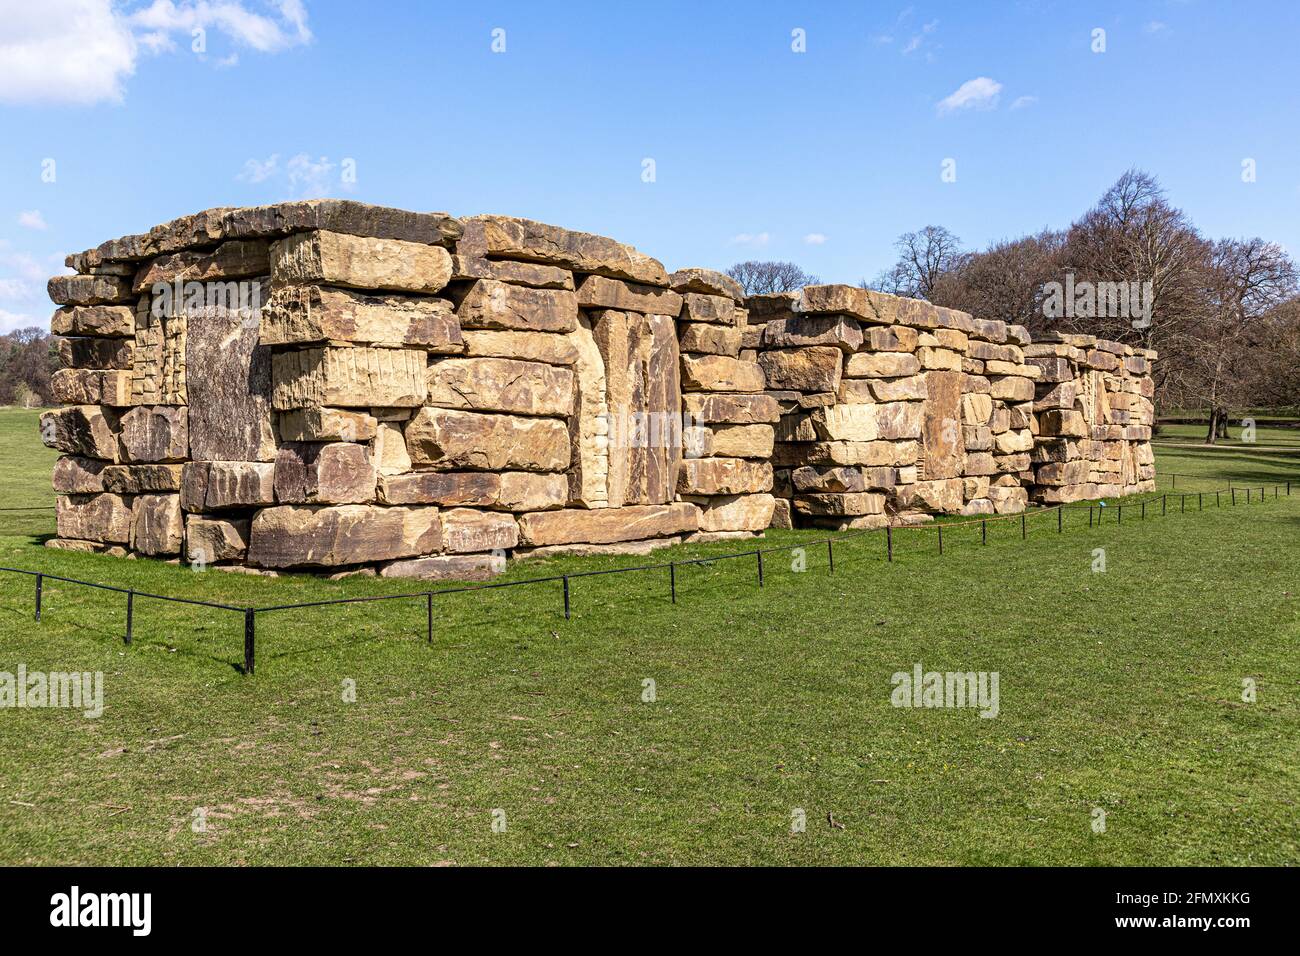 An exhibit at the Yorkshire Sculpture Park YSP at Wakefield, West Yorkshire, England UK - Wall Dale Cubed 2018 by Sean Scully Stock Photo